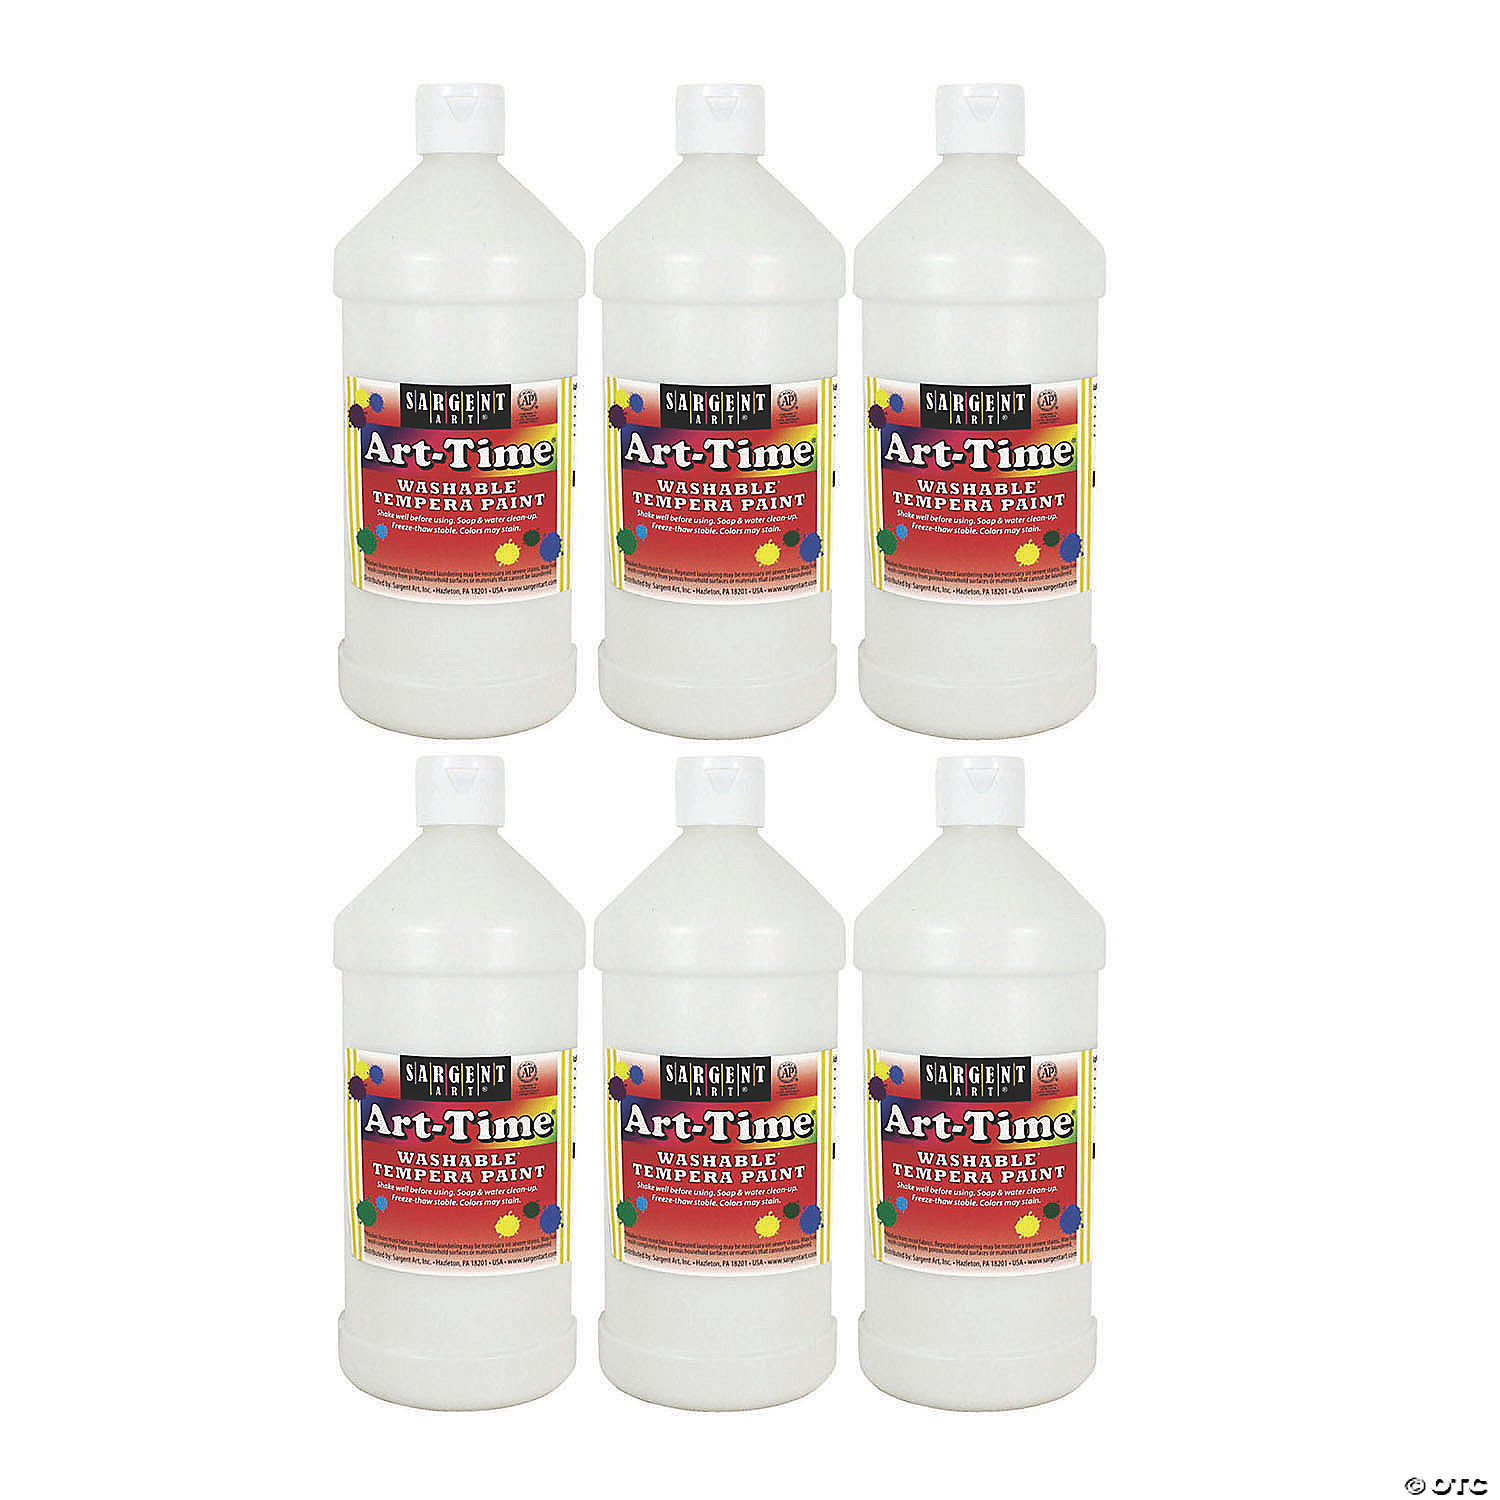 Sargent Art® Art-Time® Washable Tempera Paint, 32 oz, White, Pack of 6